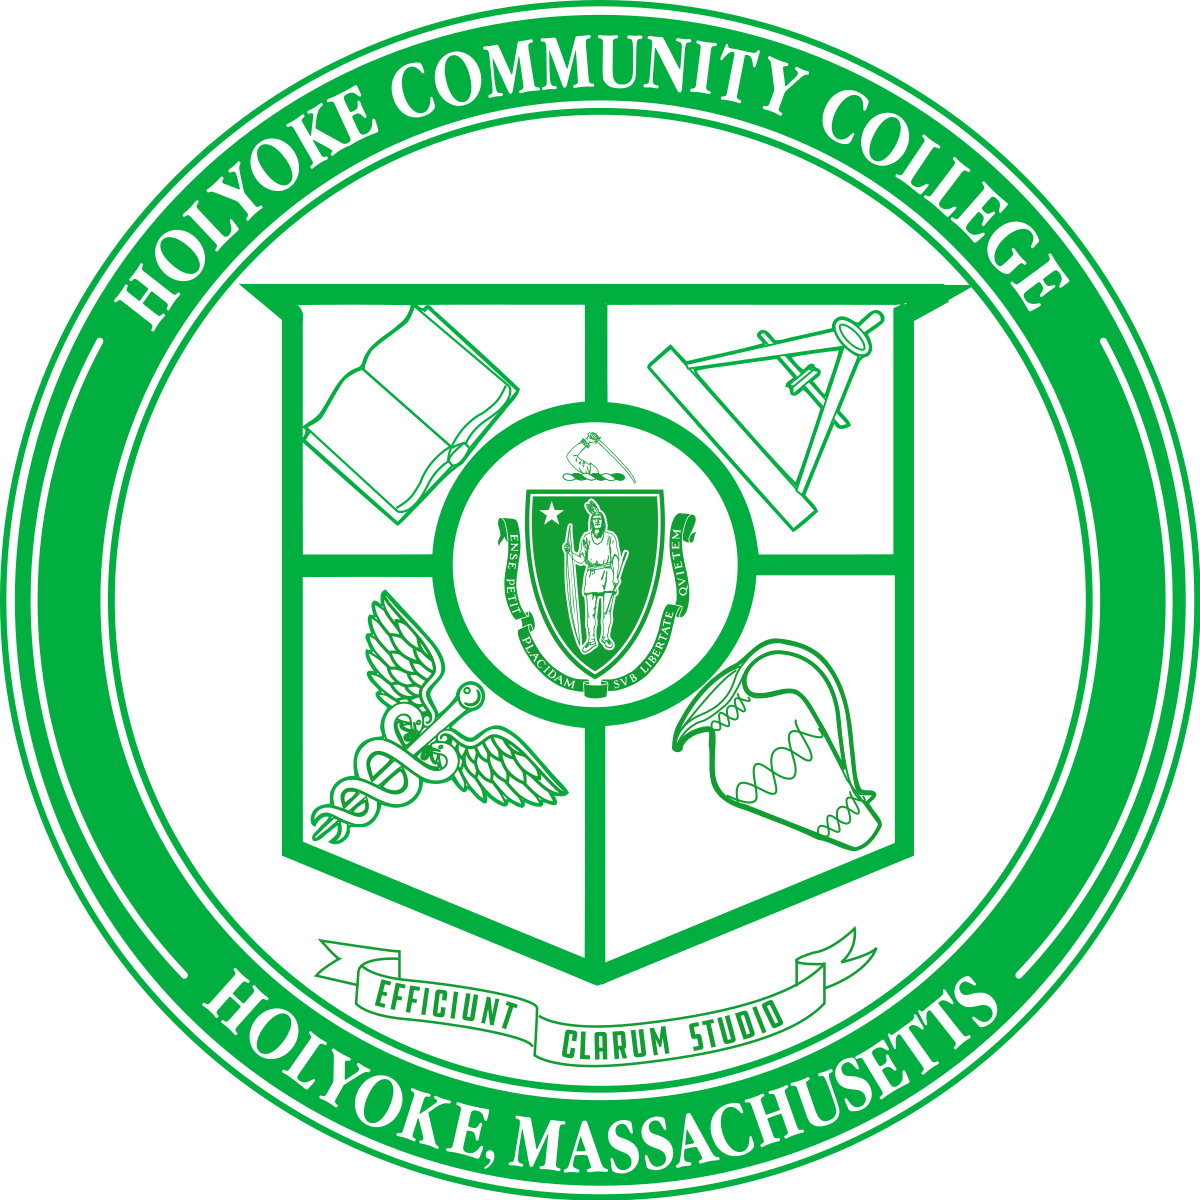 FIRST CANNABIS EDUCATION CENTER IN MASS COMING TO HOLYOKE COMMUNITY COLLEGE